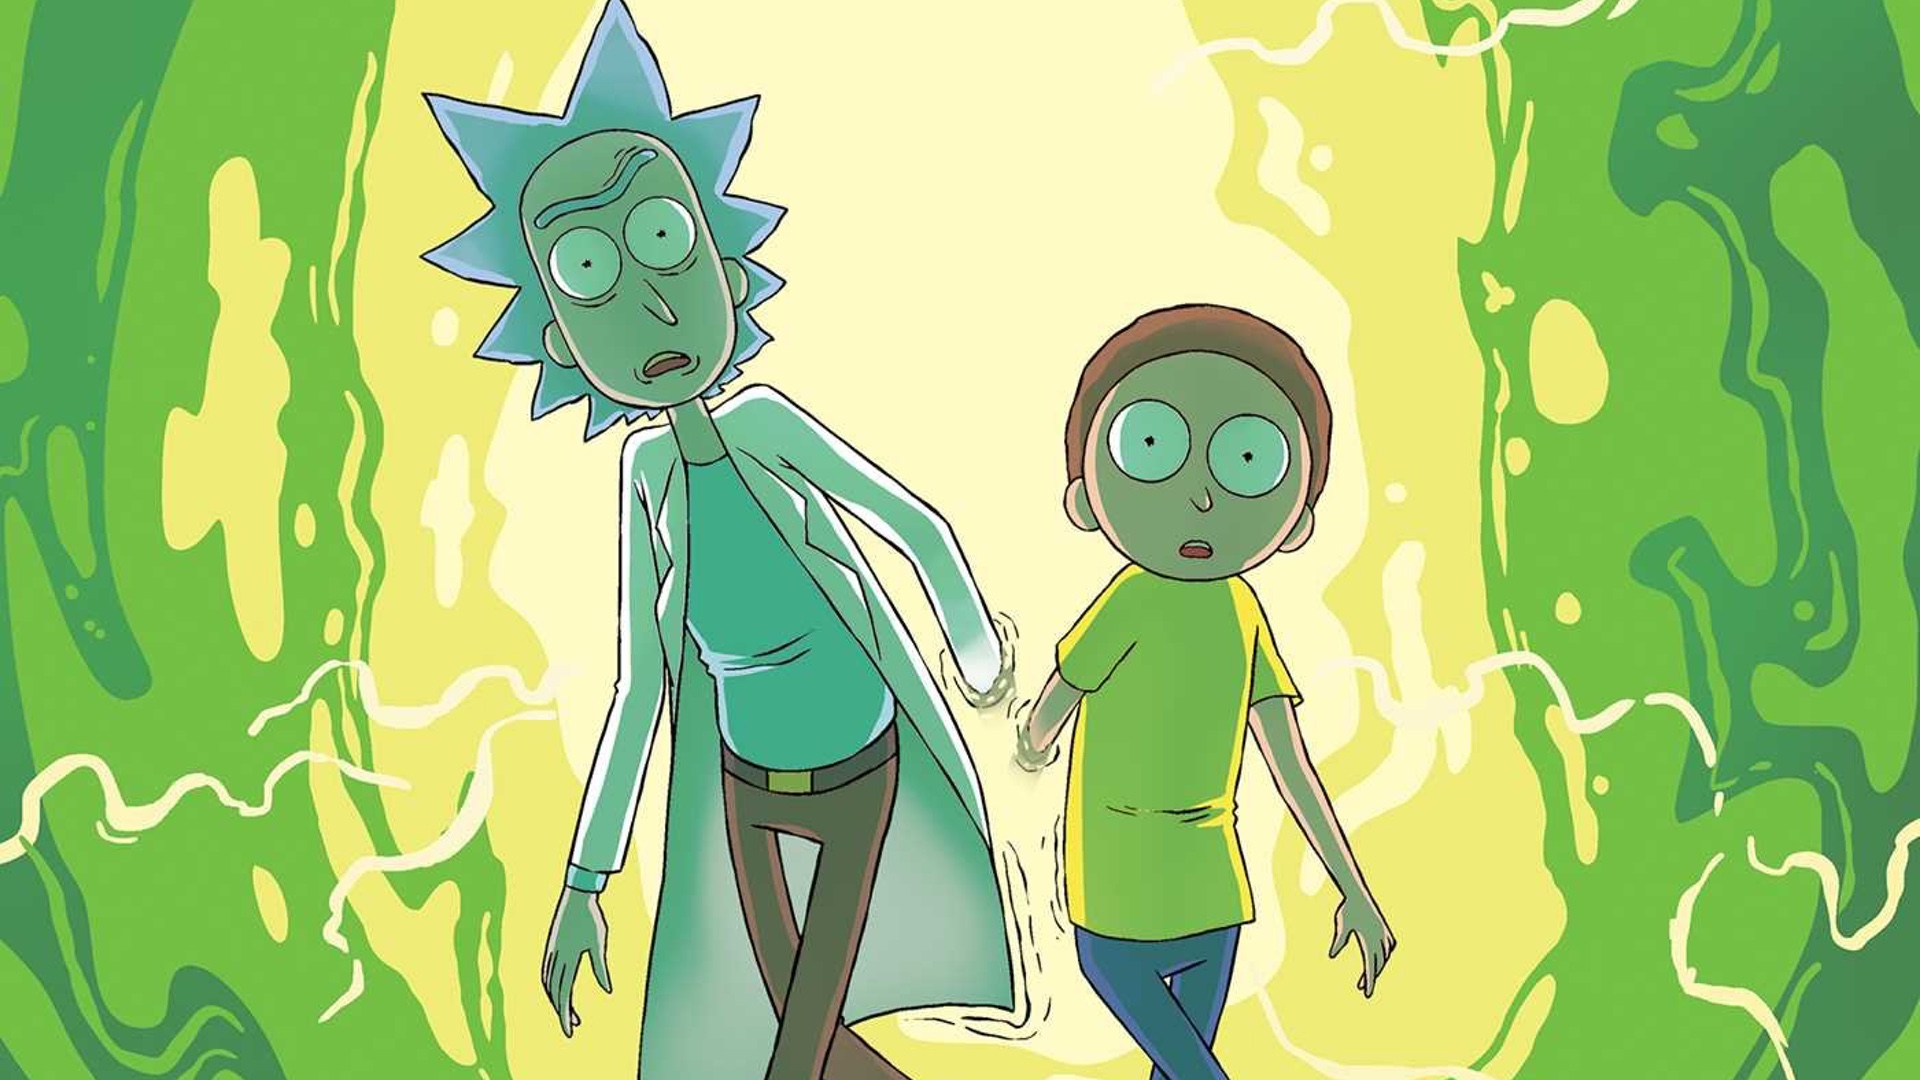 Rick and Morty Season 4 Episode 6 to Release on April 1